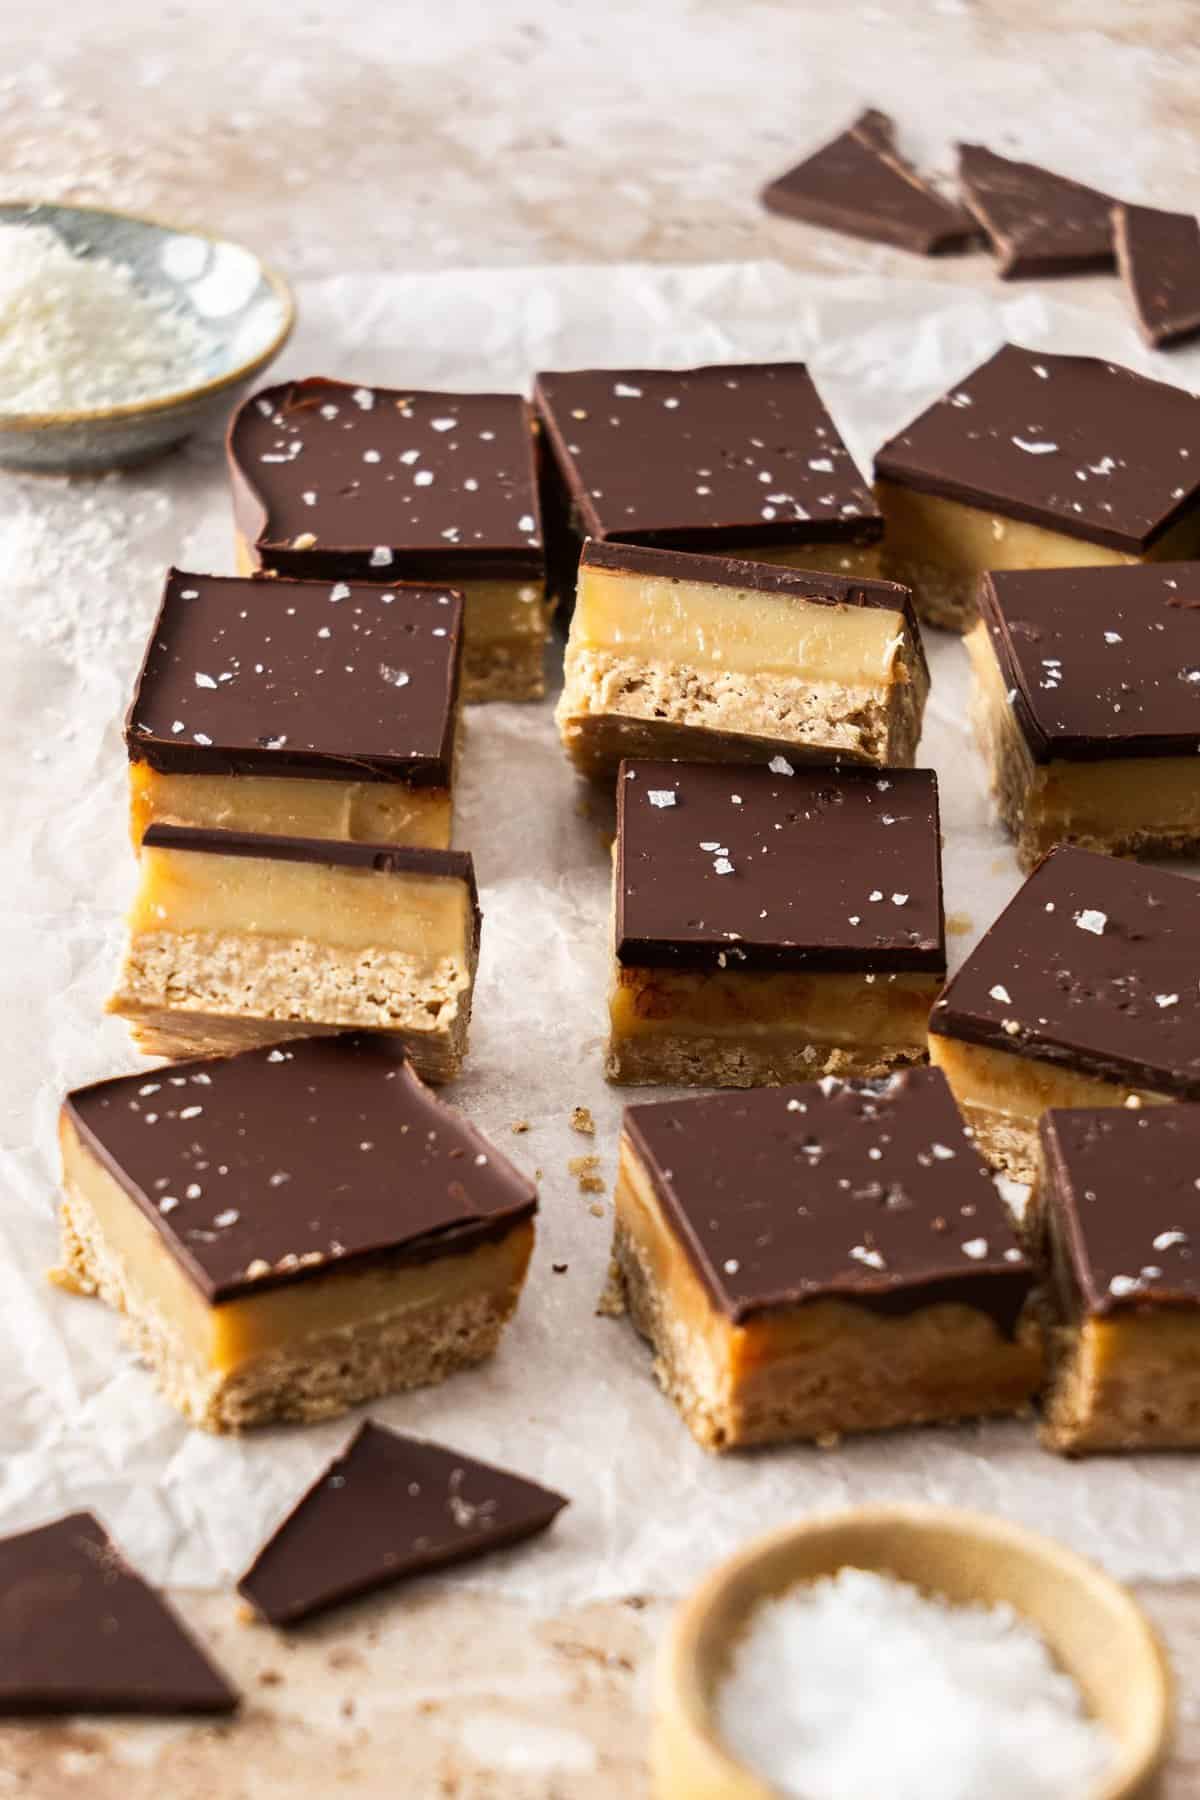 Cut pieces of salted caramel slice, sitting on some baking paper, with a few pieces on the side to show the filling.